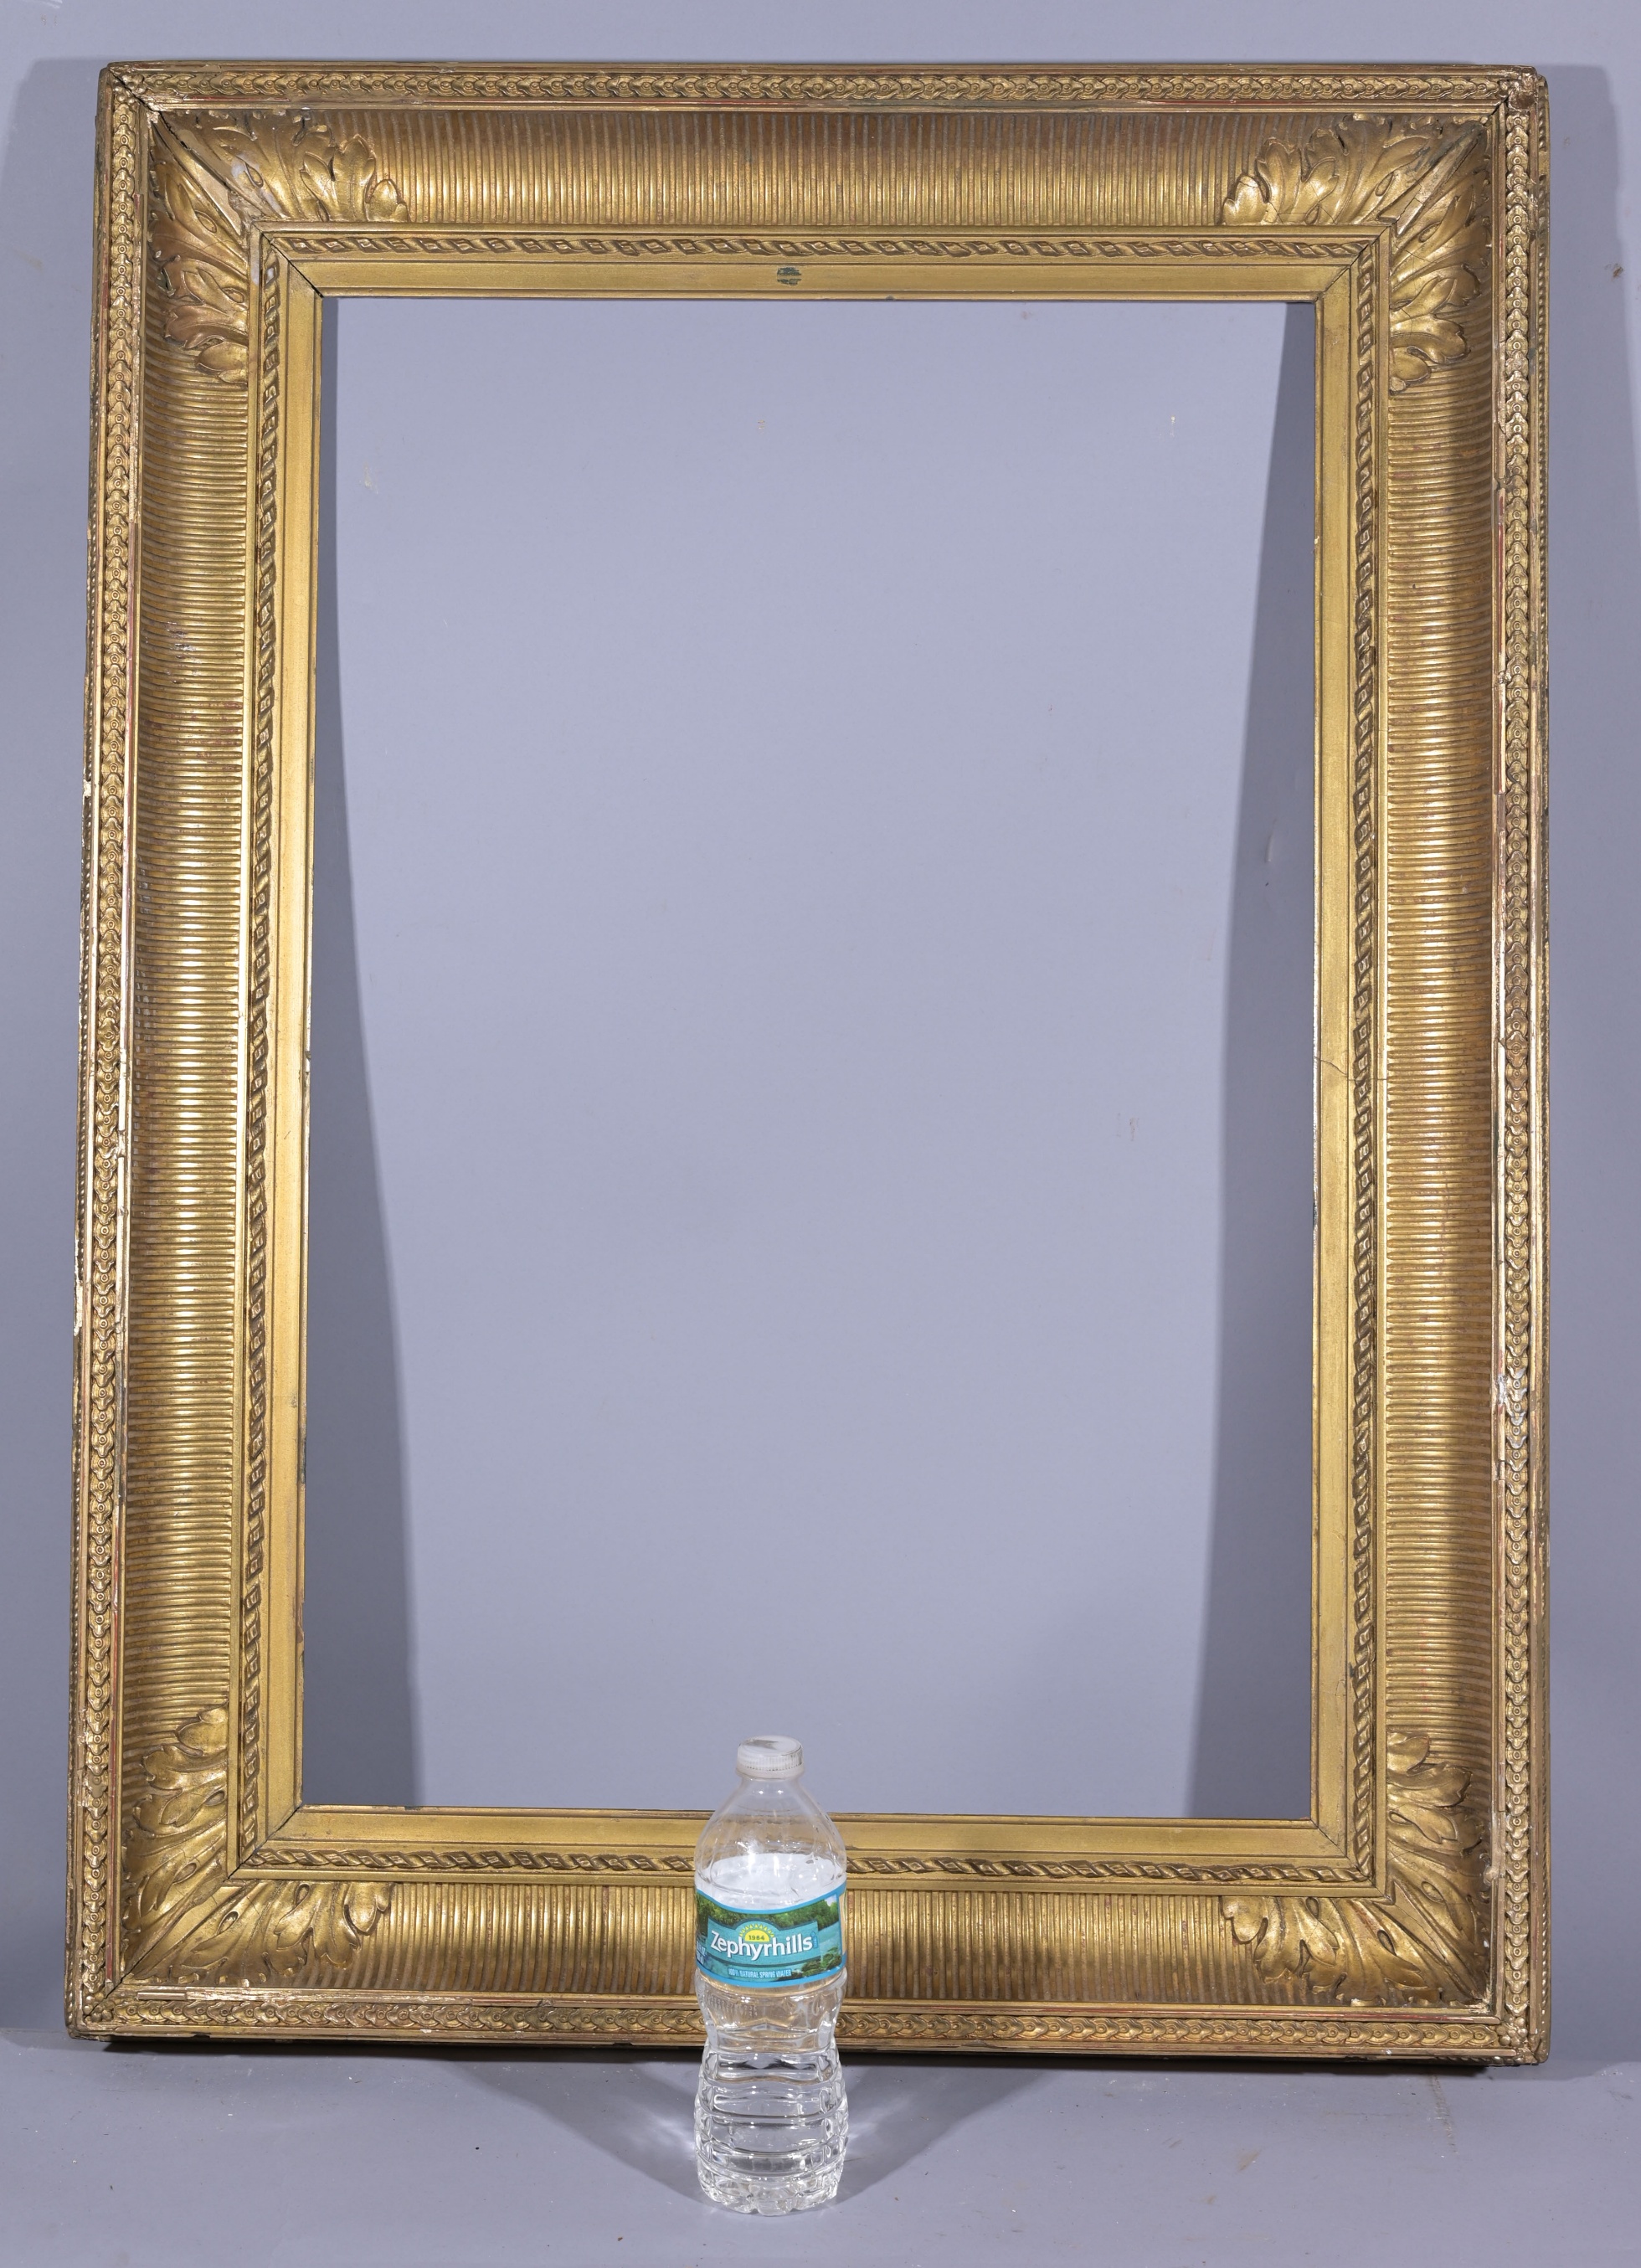 French 1860's Gilt Frame - 29.75 x 20.25 - Image 2 of 8